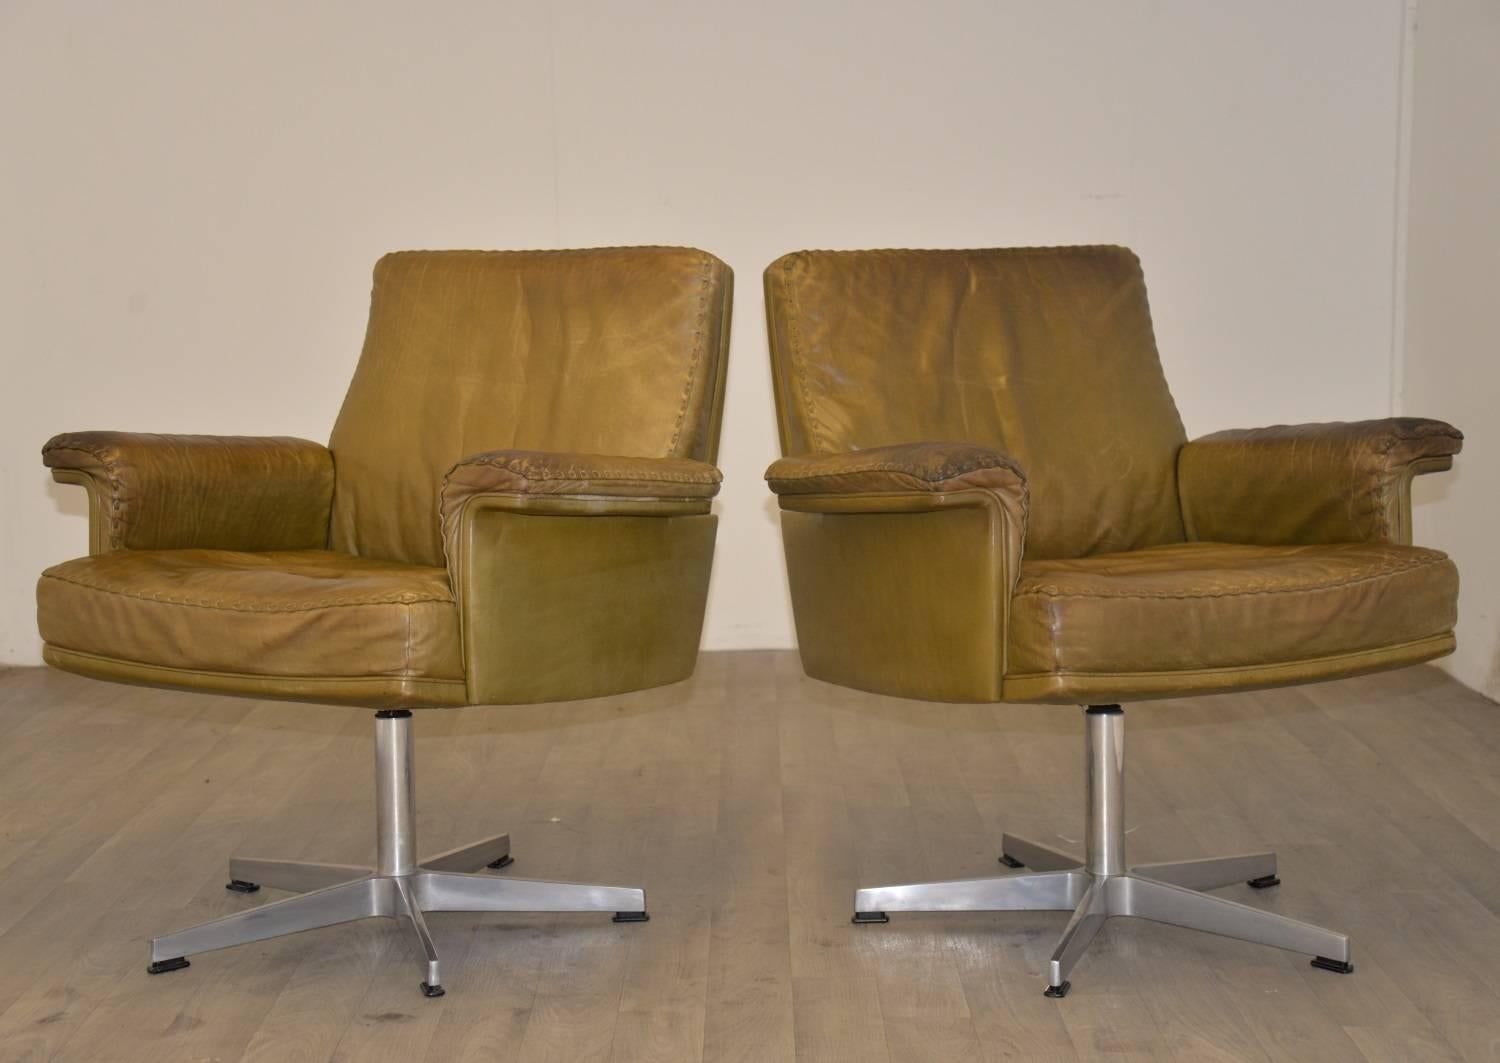 Discounted airfreight for our US Continent customers (2 weeks door to door)

Extremely rare find, pair of vintage de Sede executive desk armchairs upholstered in beautiful soft olive green aniline leather. Built in the late 1960`s by de Sede